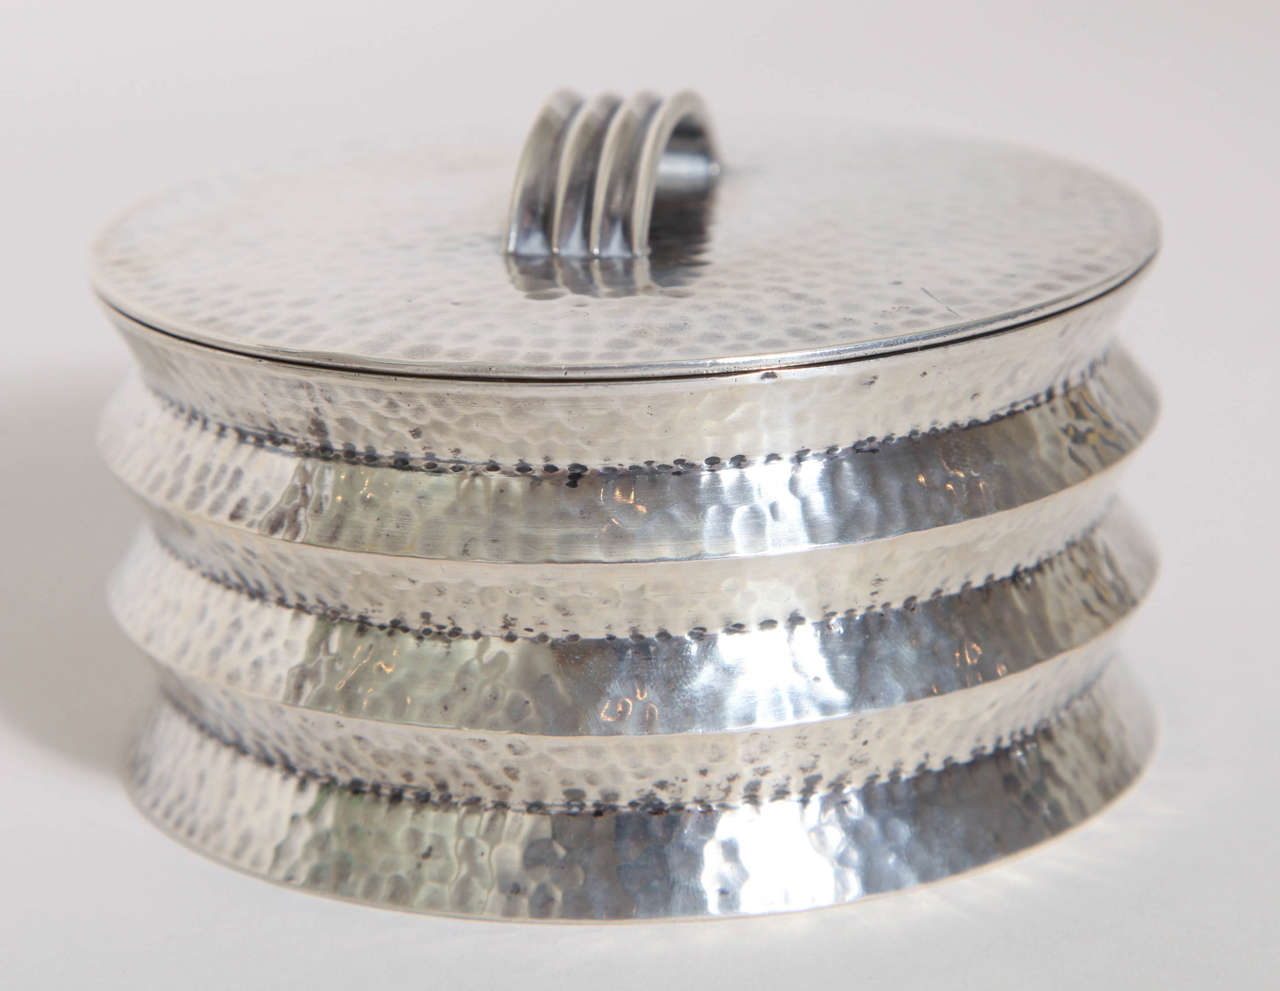 Martele silver box with indented circumferential design with semi-circular handle. 
7.35 ozs.

Czechoslovakian silver mark: triangle with cross over three hills and five indicating 800 silver (mark was used from 1929-1042)/ maker's mark MV.